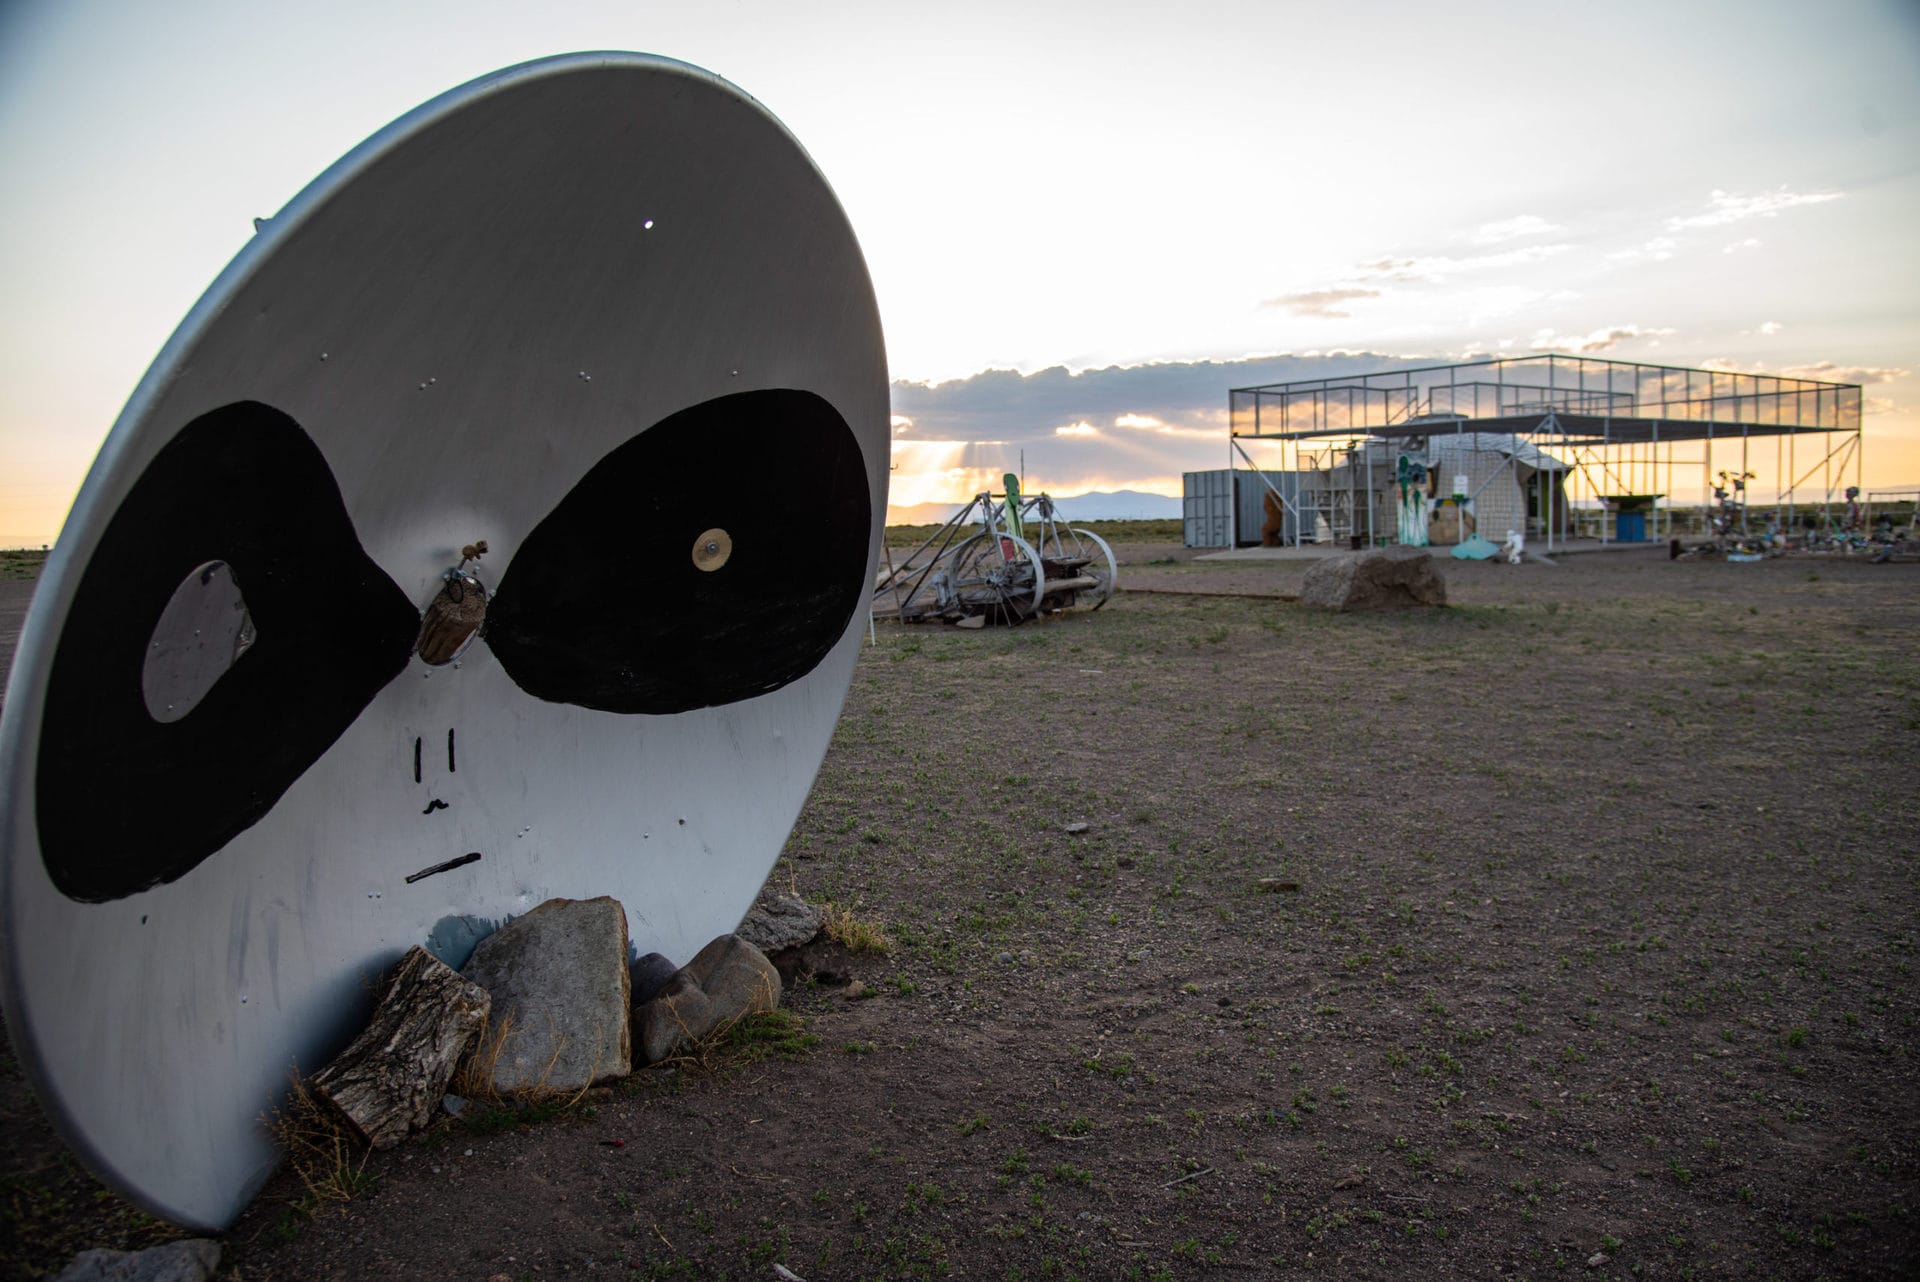 It started as a joke, but Colorado's UFO Watchtower is now a hotspot for  mysterious sightings - Roadtrippers